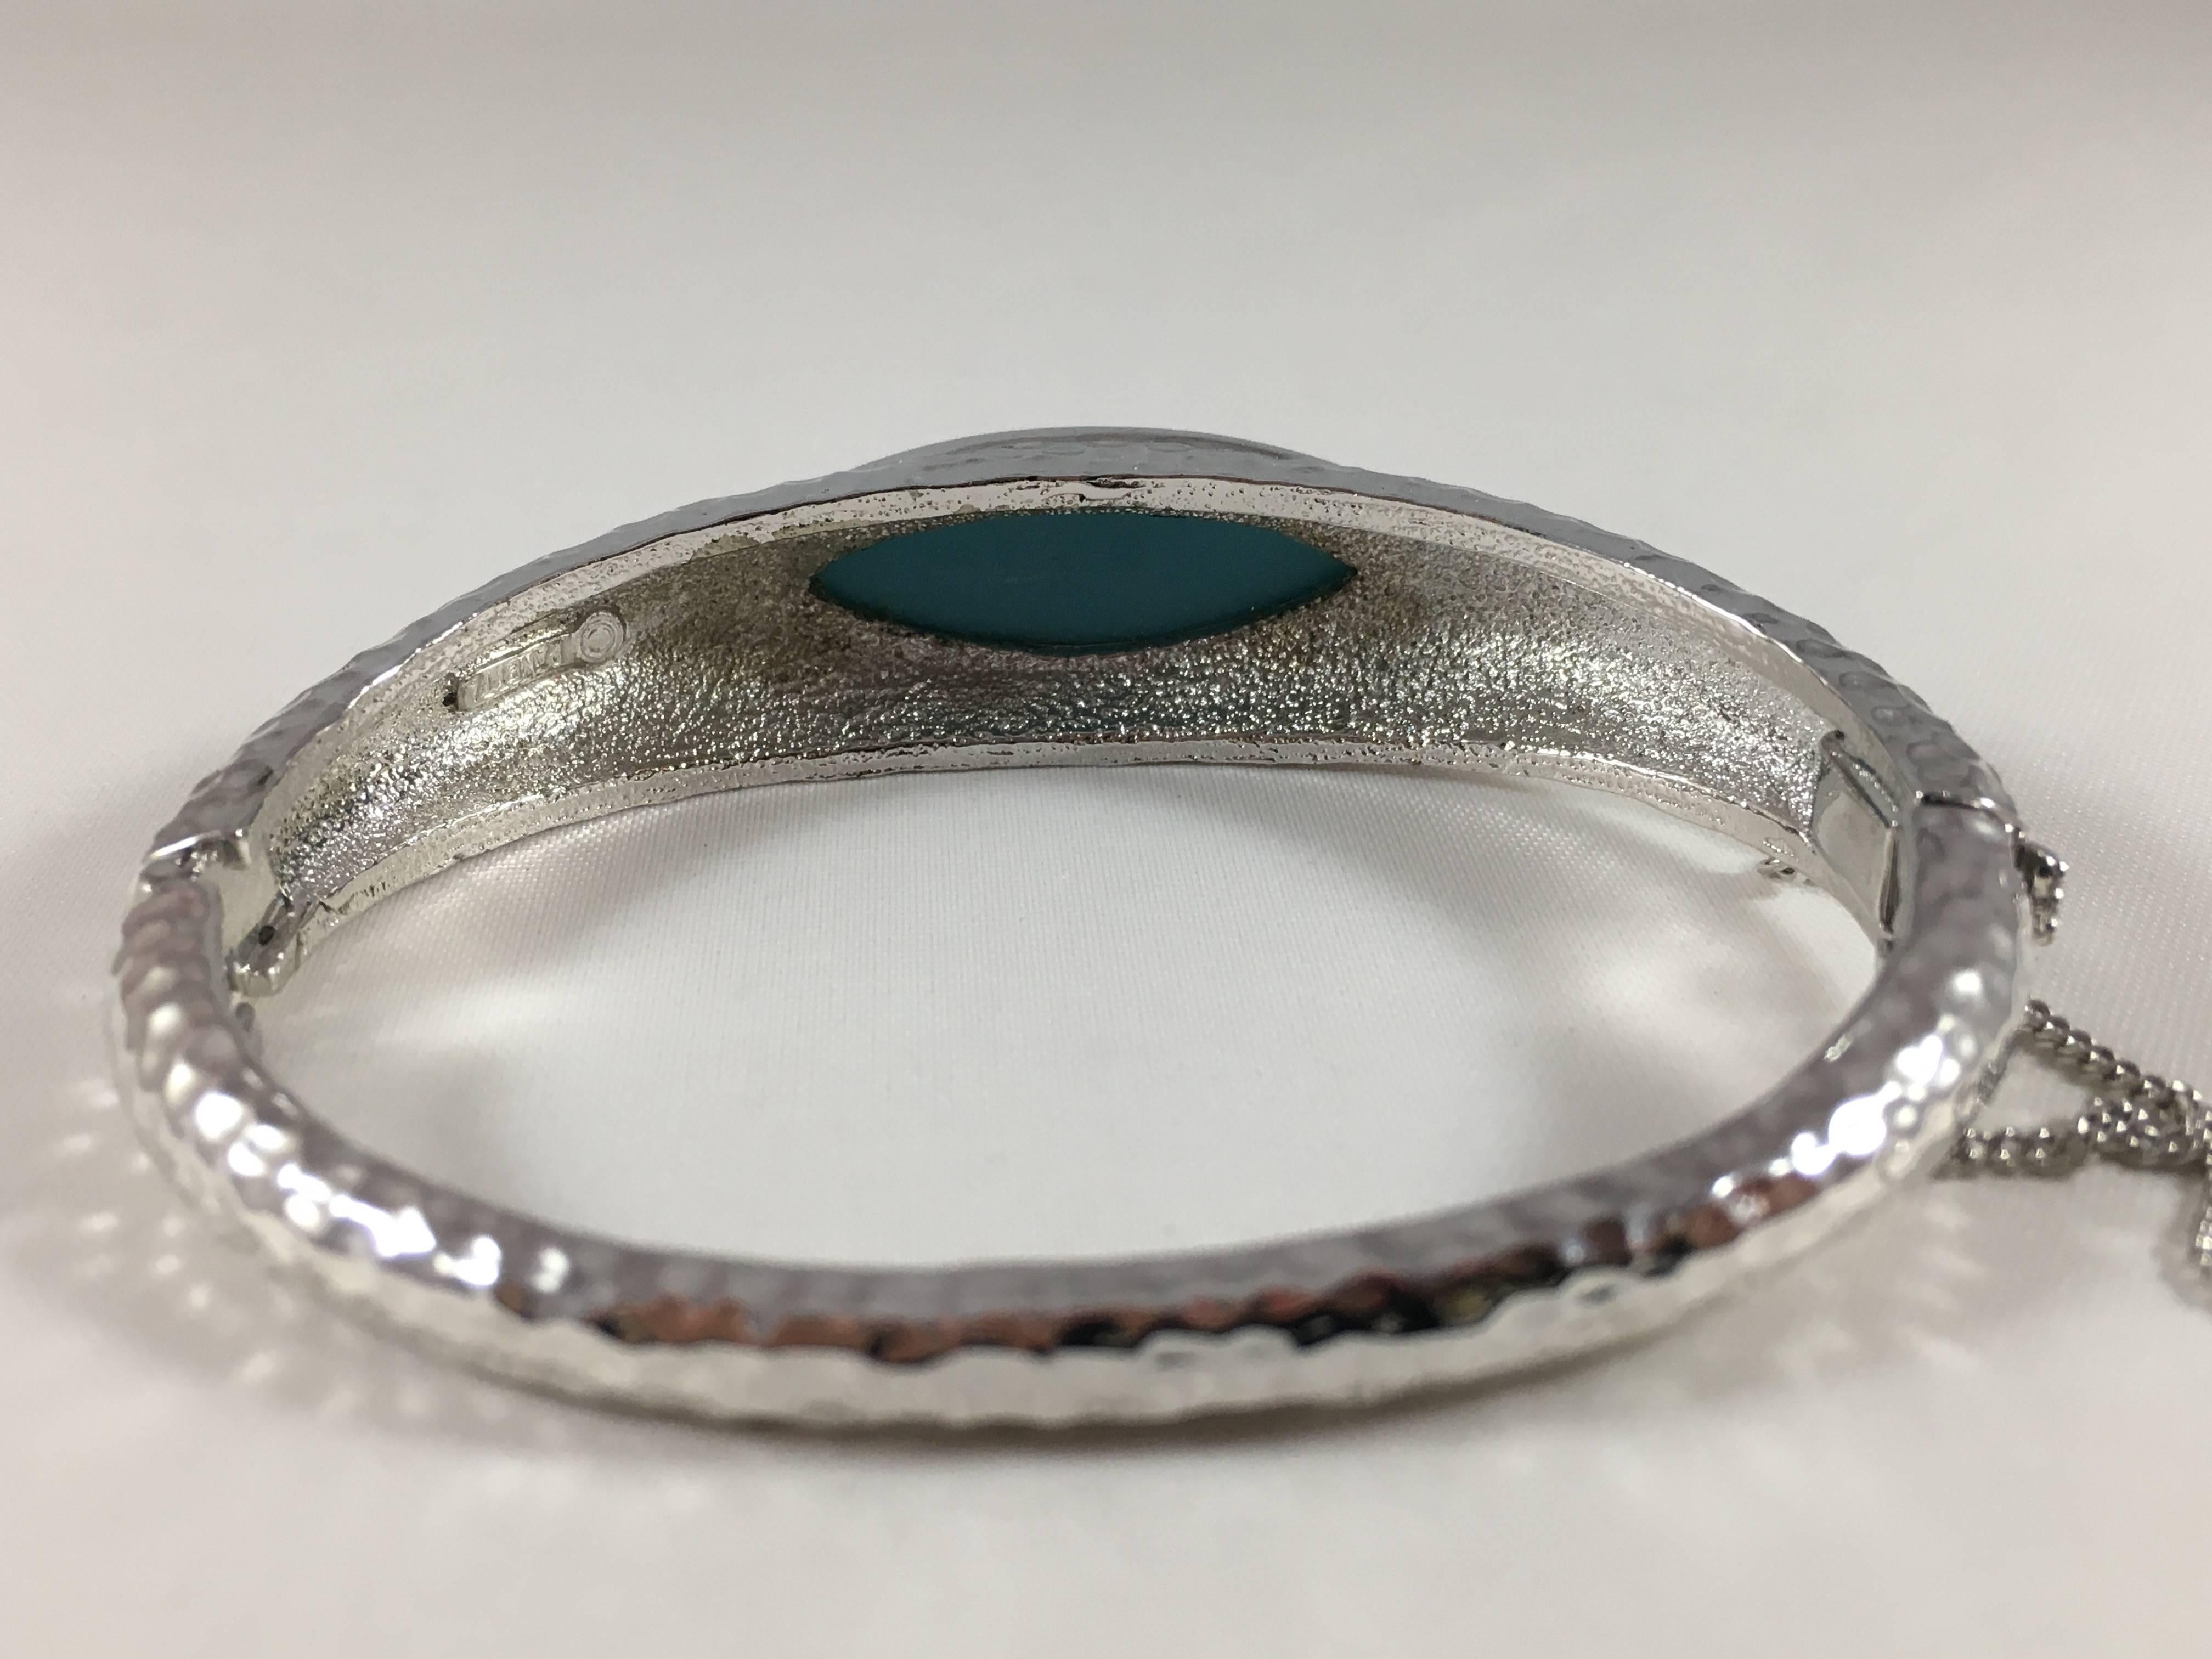 Panetta Vintage Hammered Silver and Turquoise Bracelet, 1970s  For Sale 2